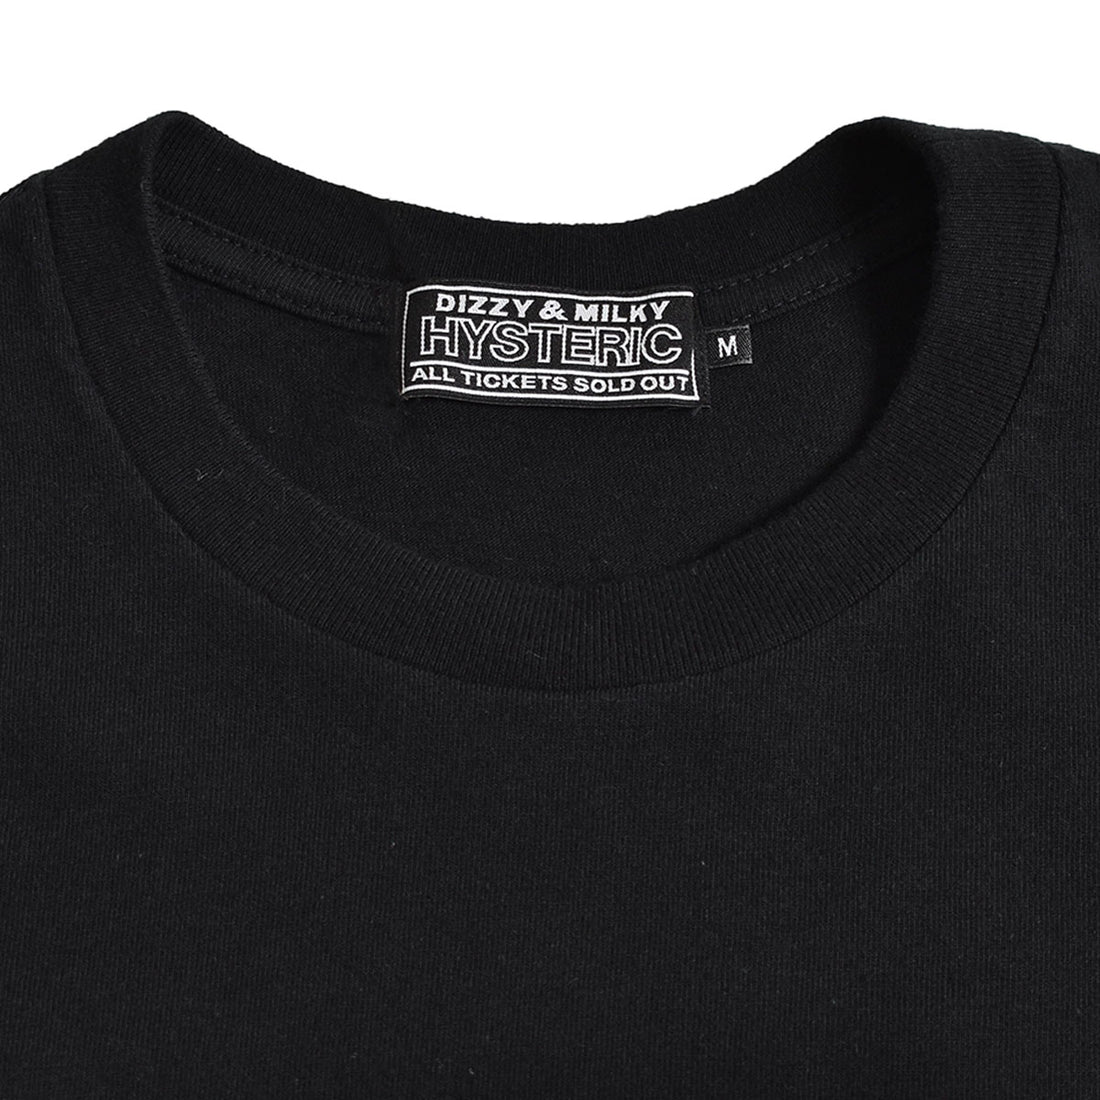 [HYSTERIC GLAMOUR]RELIEVES TENSION Tシャツ/BLACK(02233CT02)